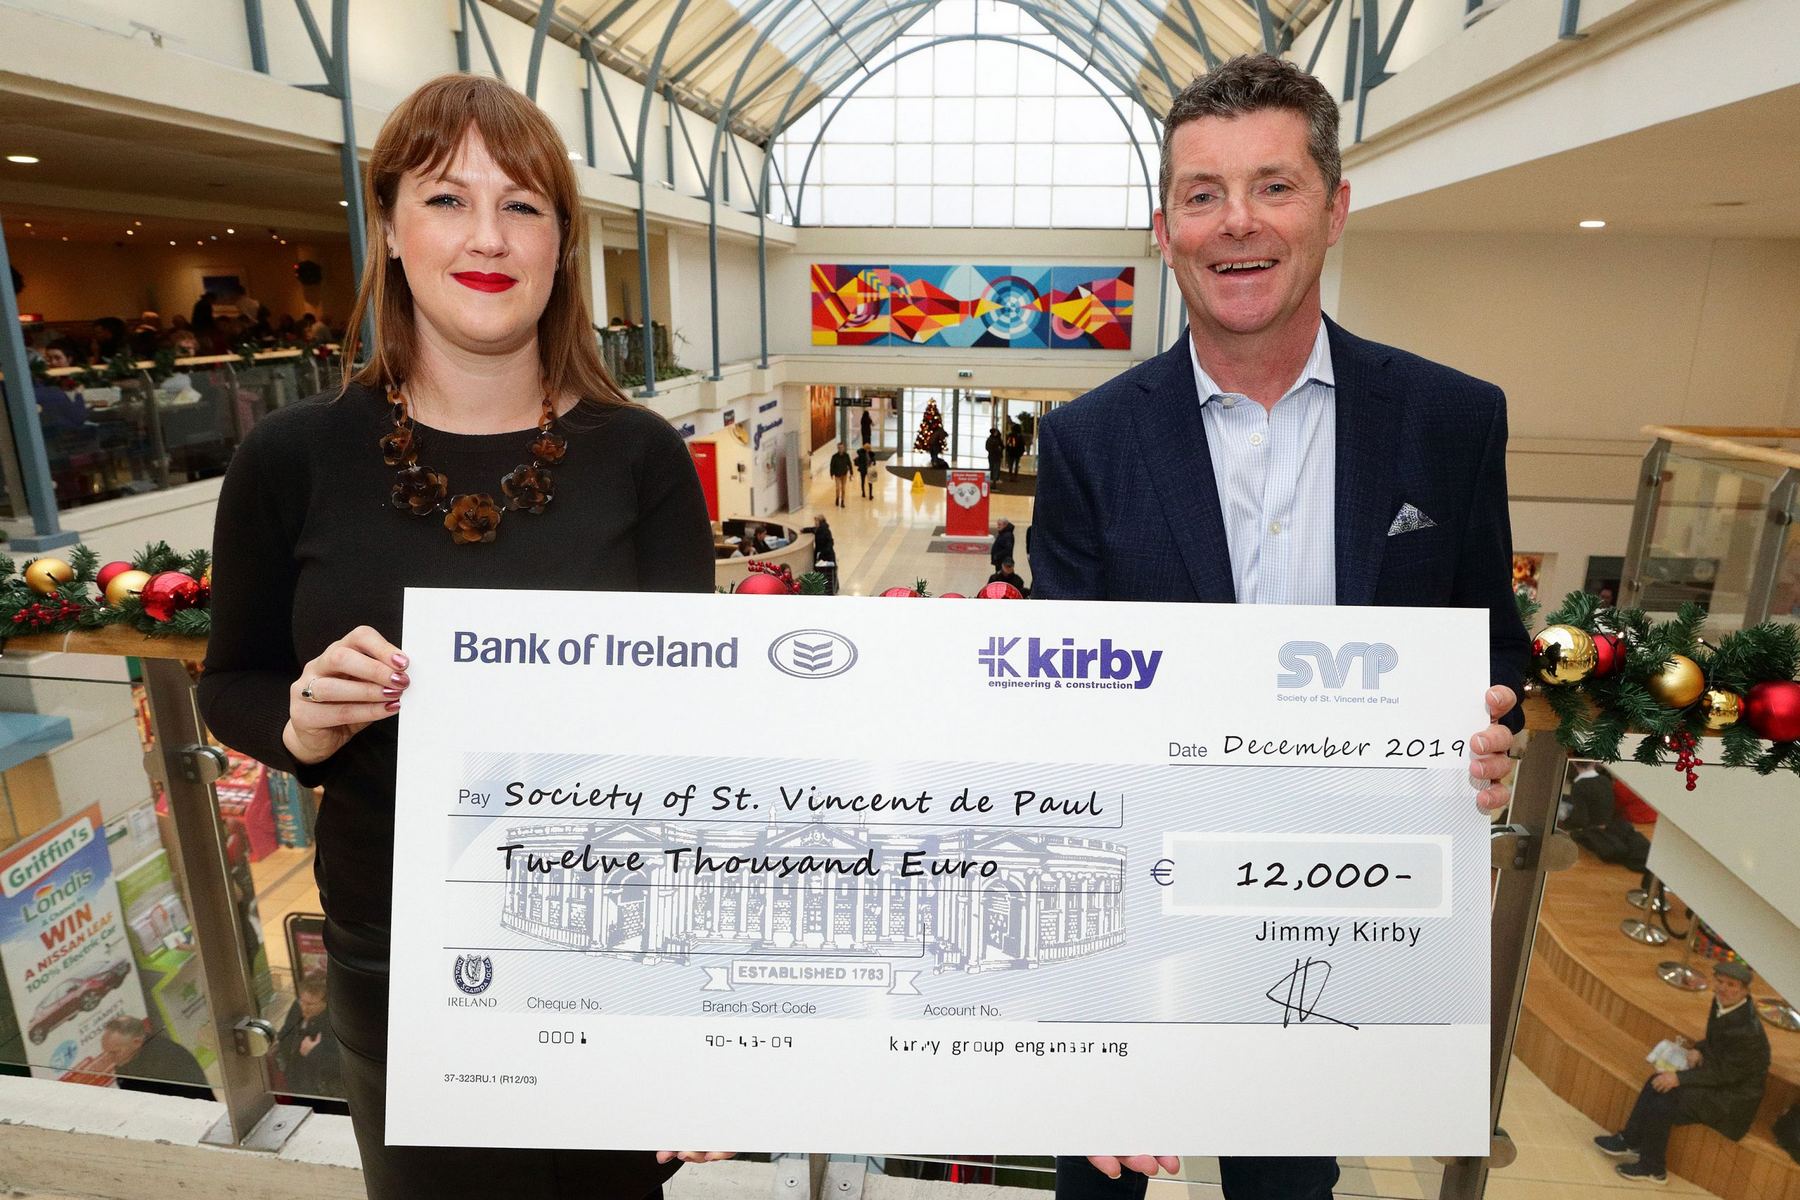 Jimmy Kirby, Kirby Group Managing Director presents €12,000 donation to Deirdre Mullen, SVP